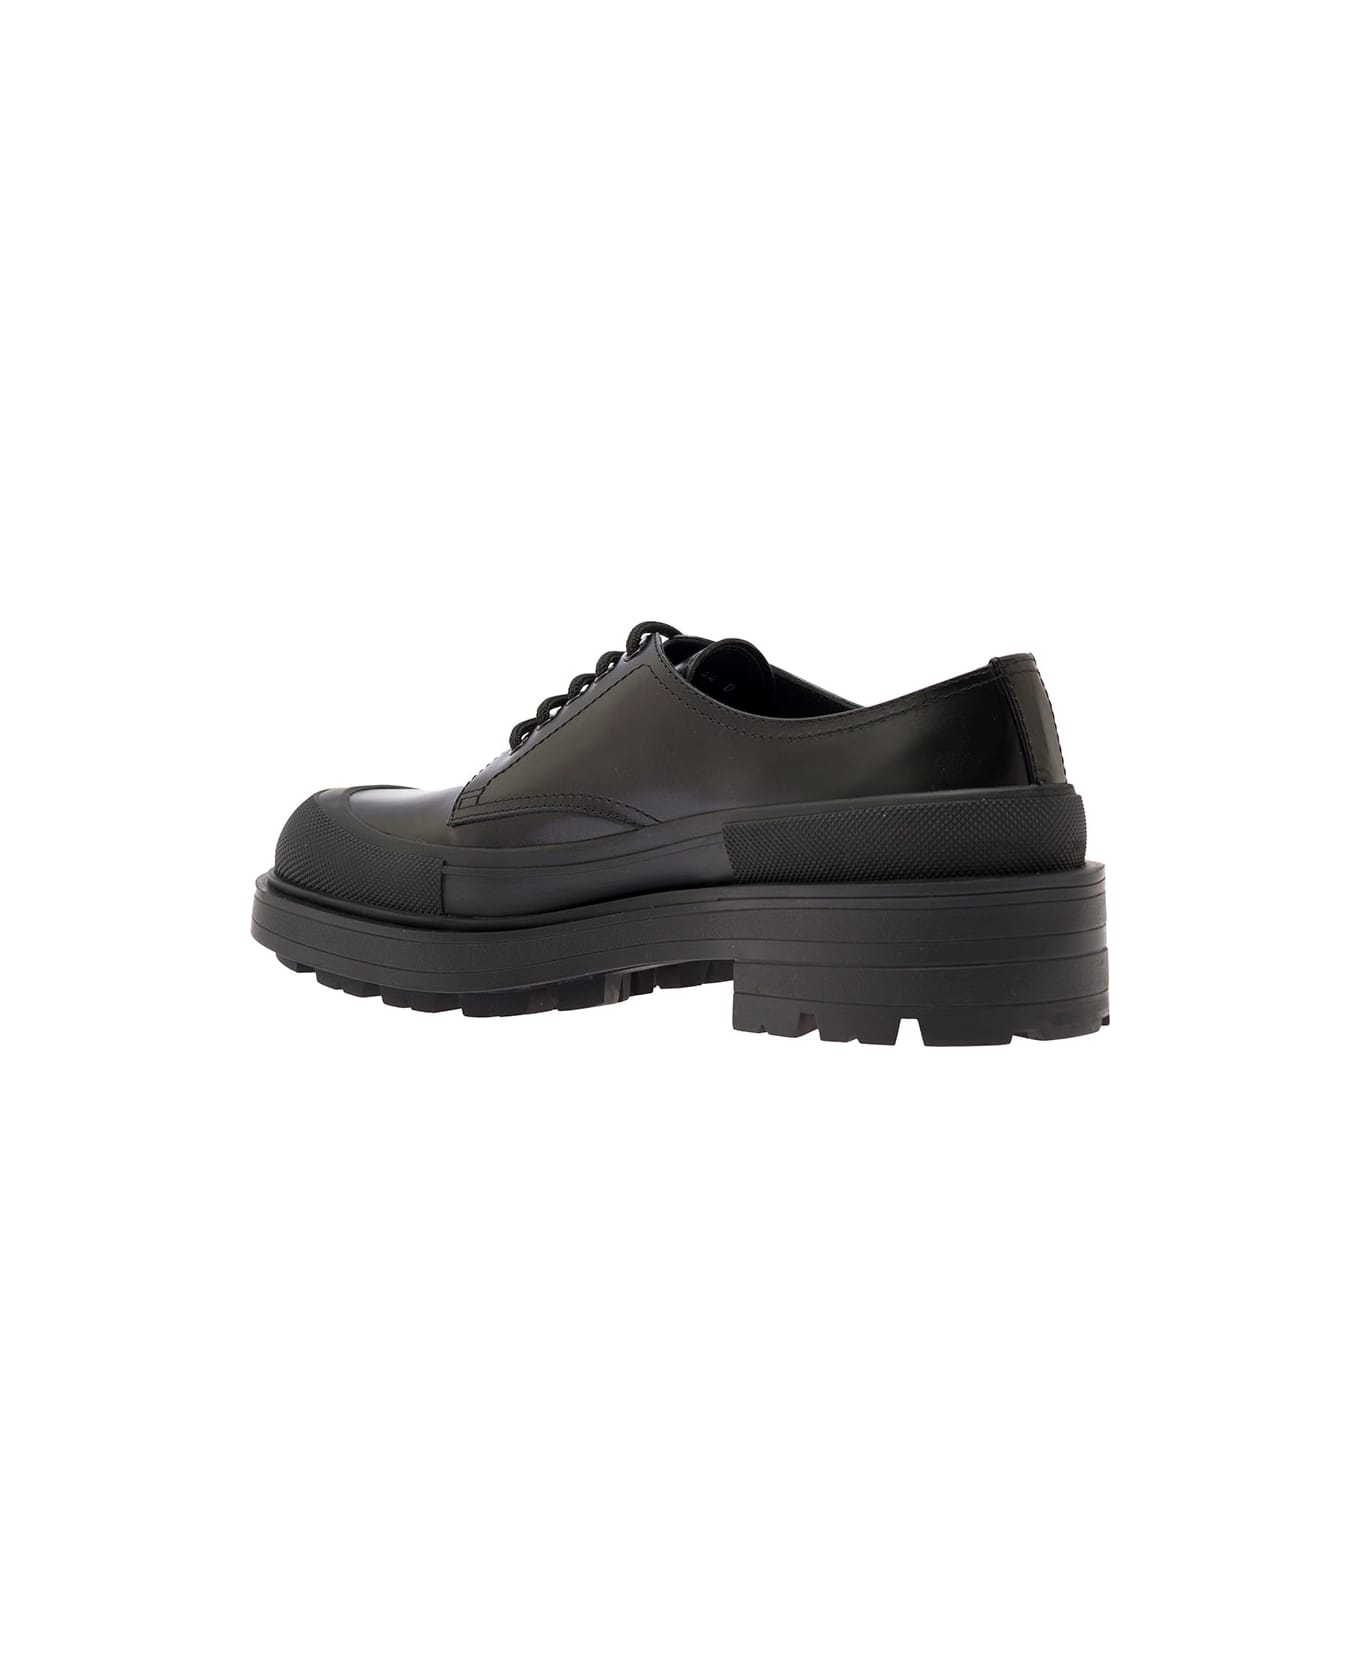 Alexander McQueen Black Derby Shoes In Calf Leather Man - Black ローファー＆デッキシューズ